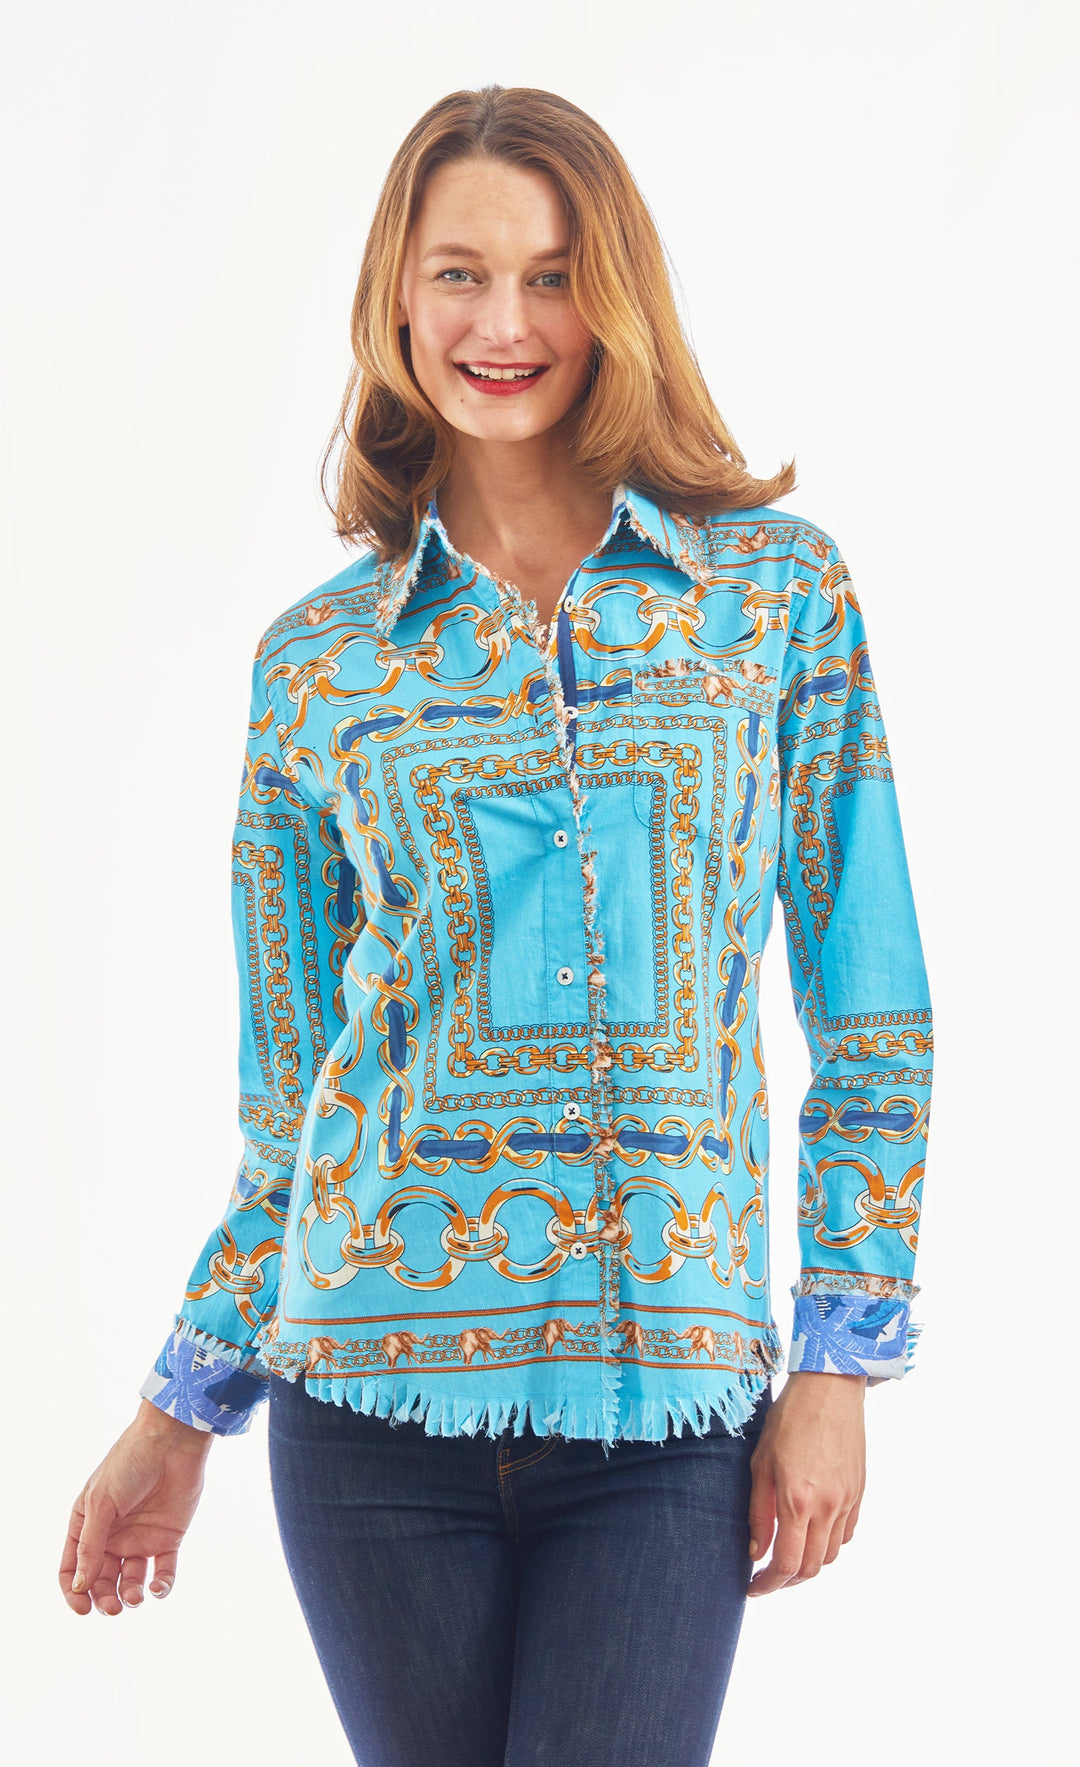 Cape Cod Tunic Bluee Links with Ellies XS / 4949-S614